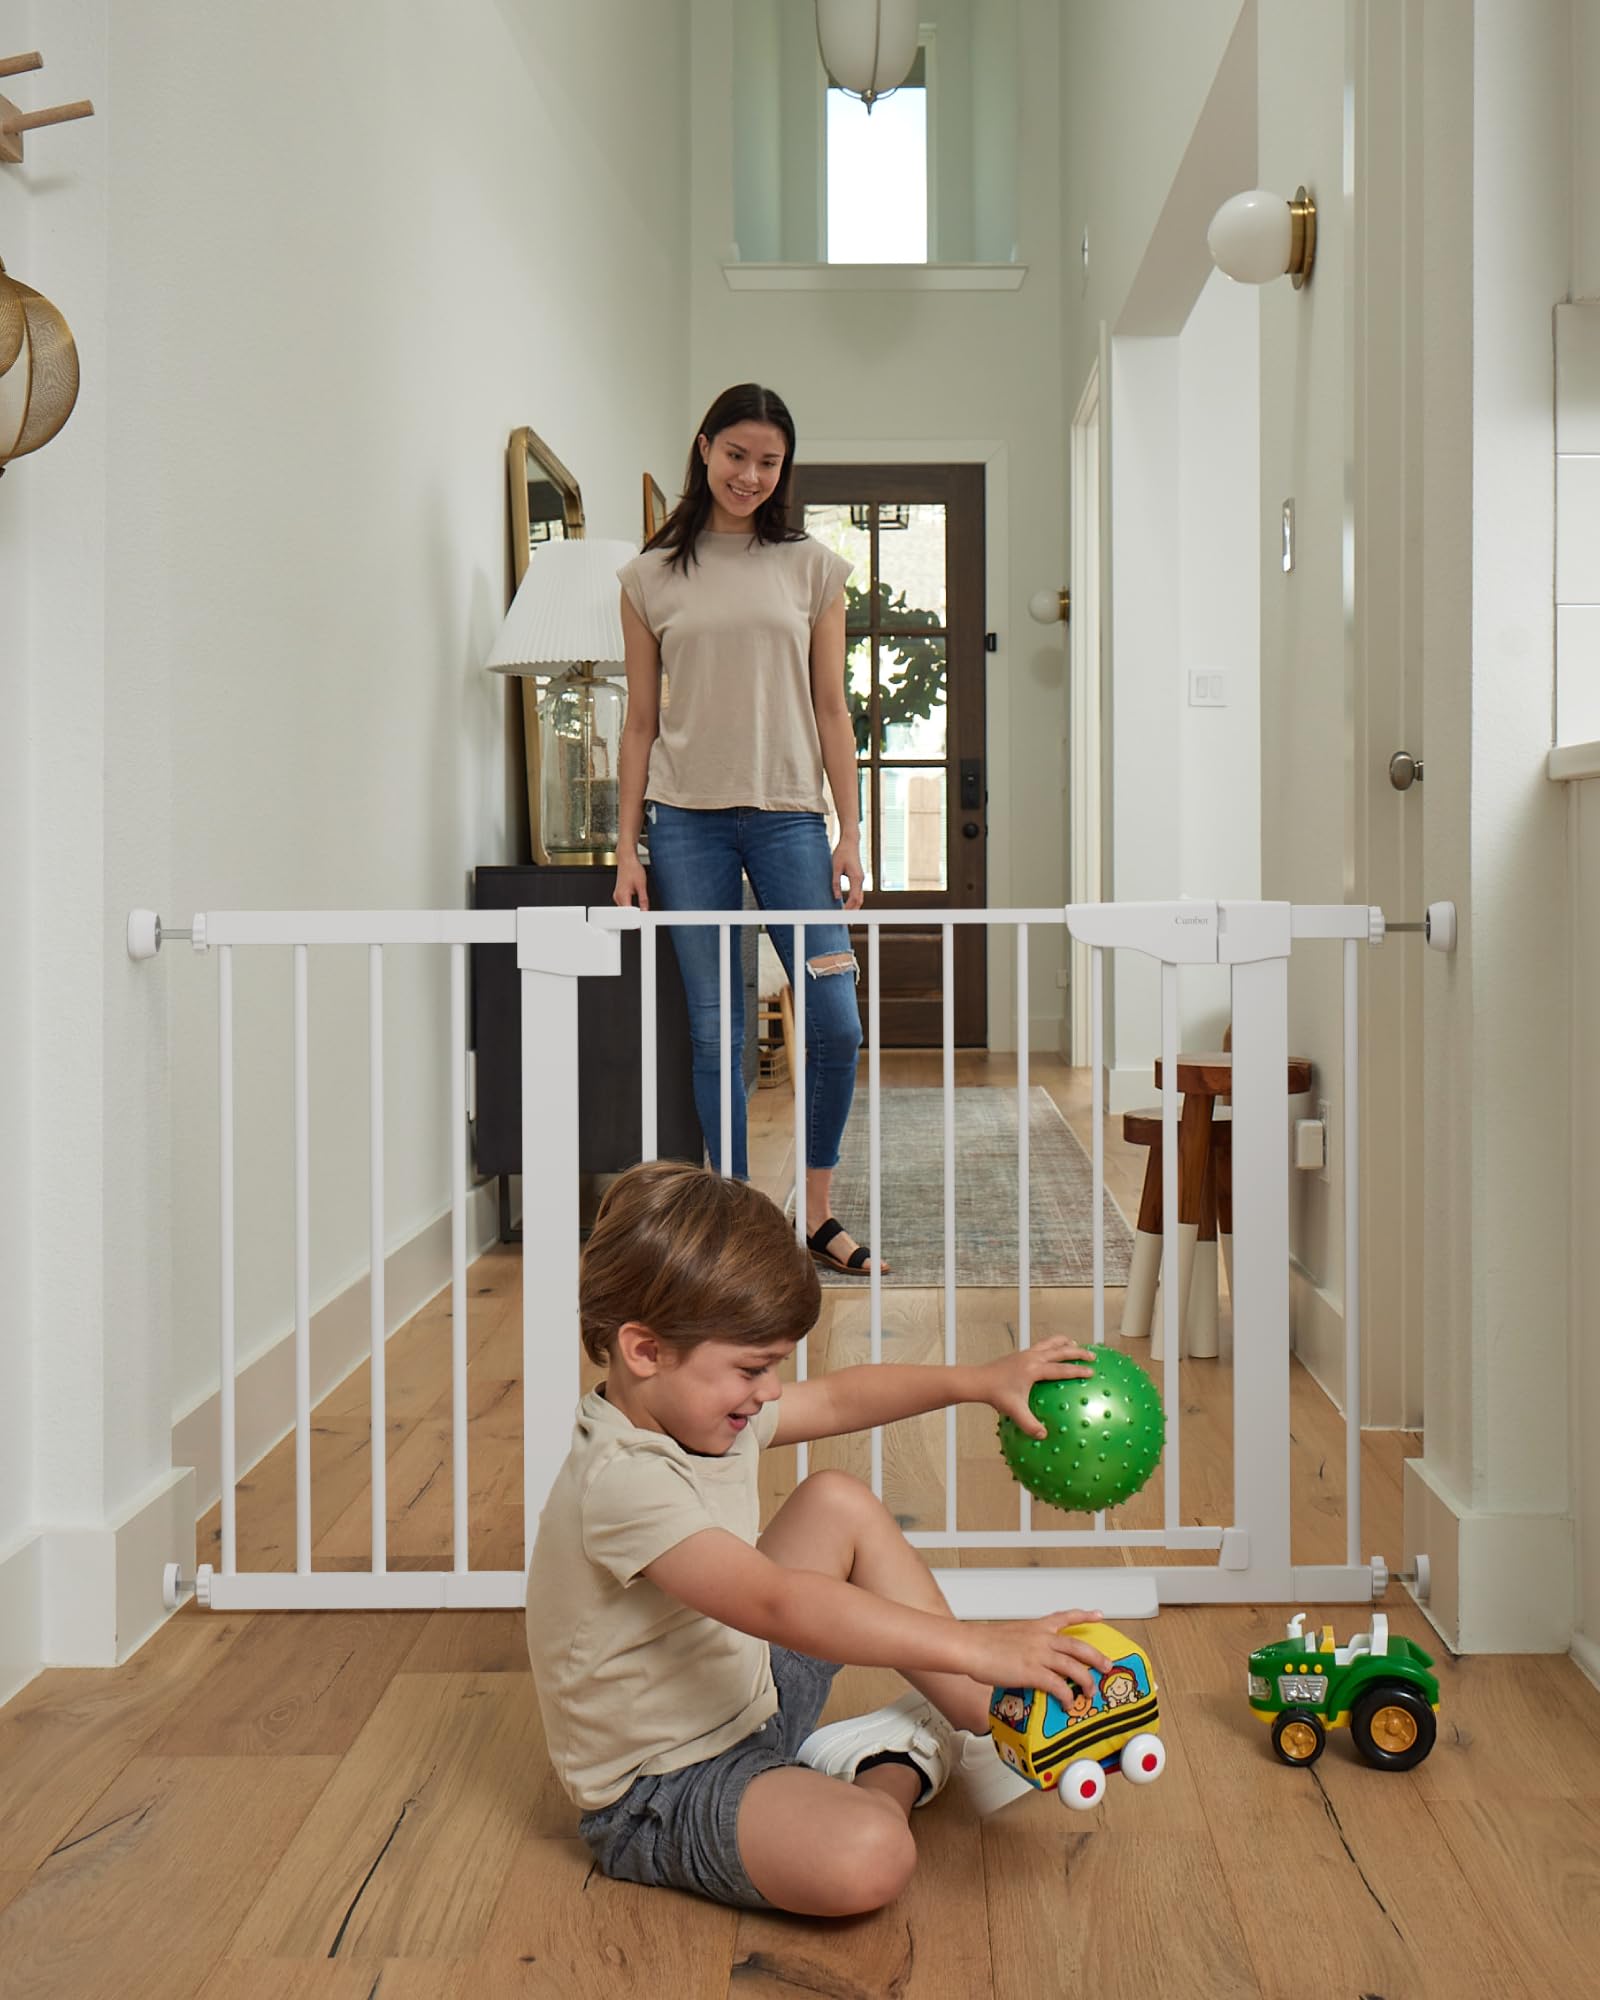 Cumbor 29.7-46" Baby Gate for Stairs, Mom's Choice Awards Winner-Auto Close Dog Gate for the House, Easy Install Pressure Mounted Pet Gates for Doorways, Easy Walk Thru Wide Safety Gate for Dog, White